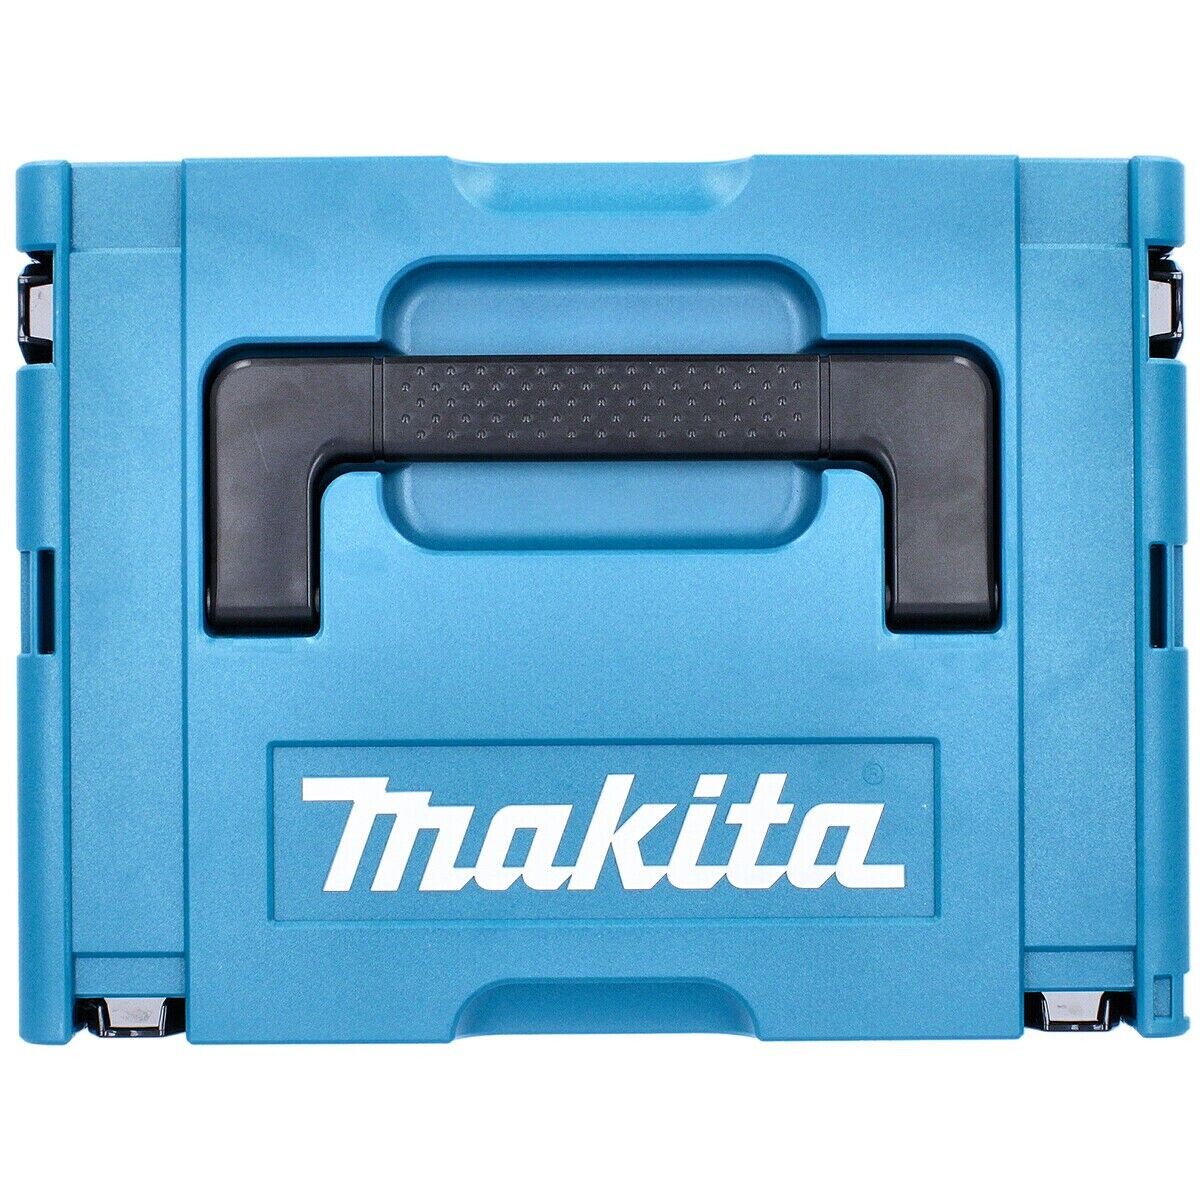 Makita 821550-0 MakPac Type 2 Connector Case 396mm x 296mm x 157mm Pack of 2